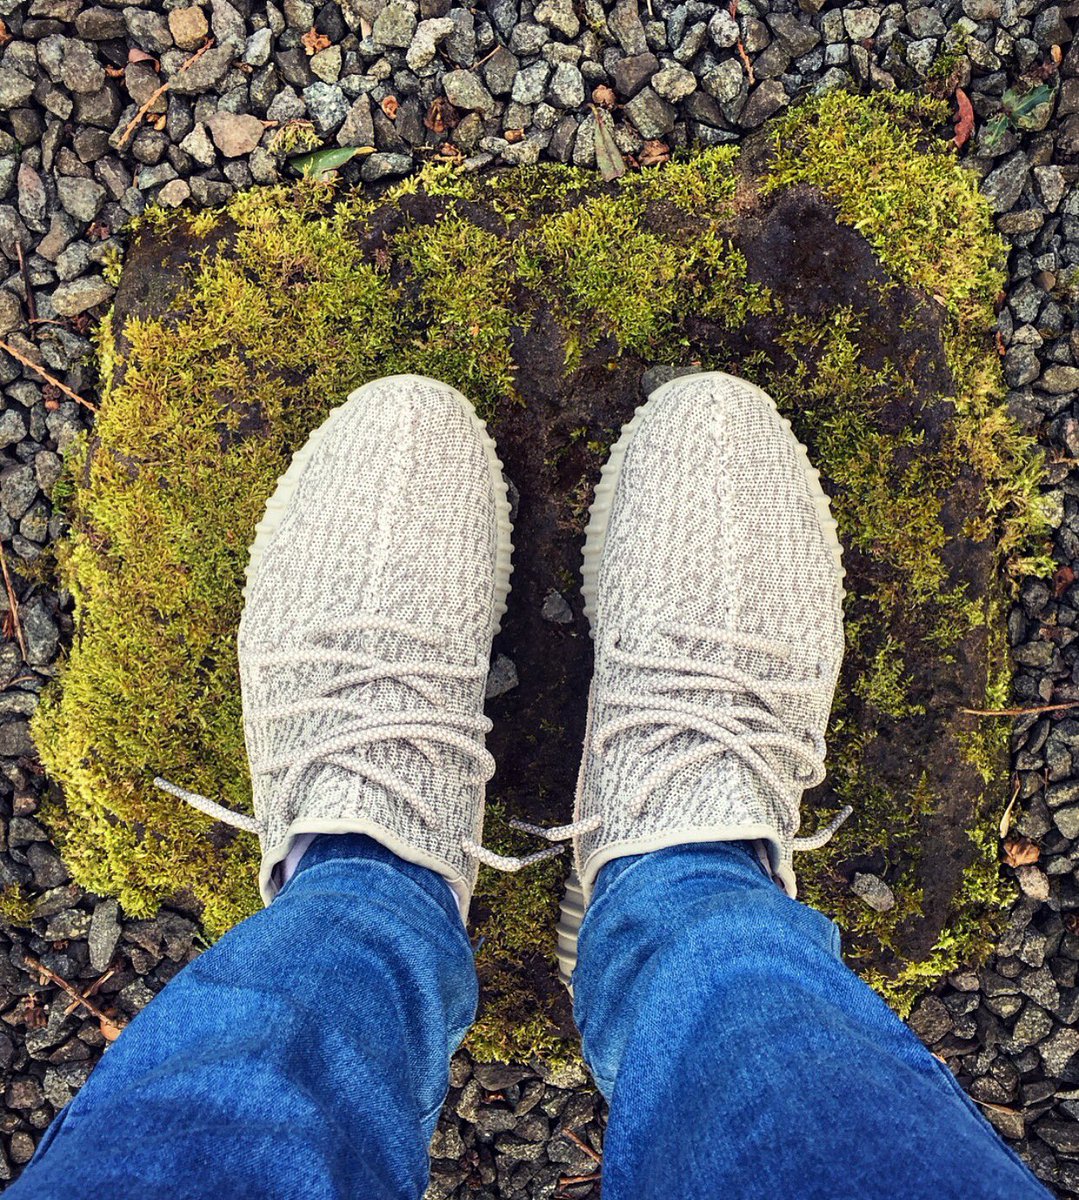 Yeezys For All on Twitter: "Moonrock 350 on feet this morning. What #Yeezy's are you wearing today? https://t.co/hczN0tAlCJ" / Twitter